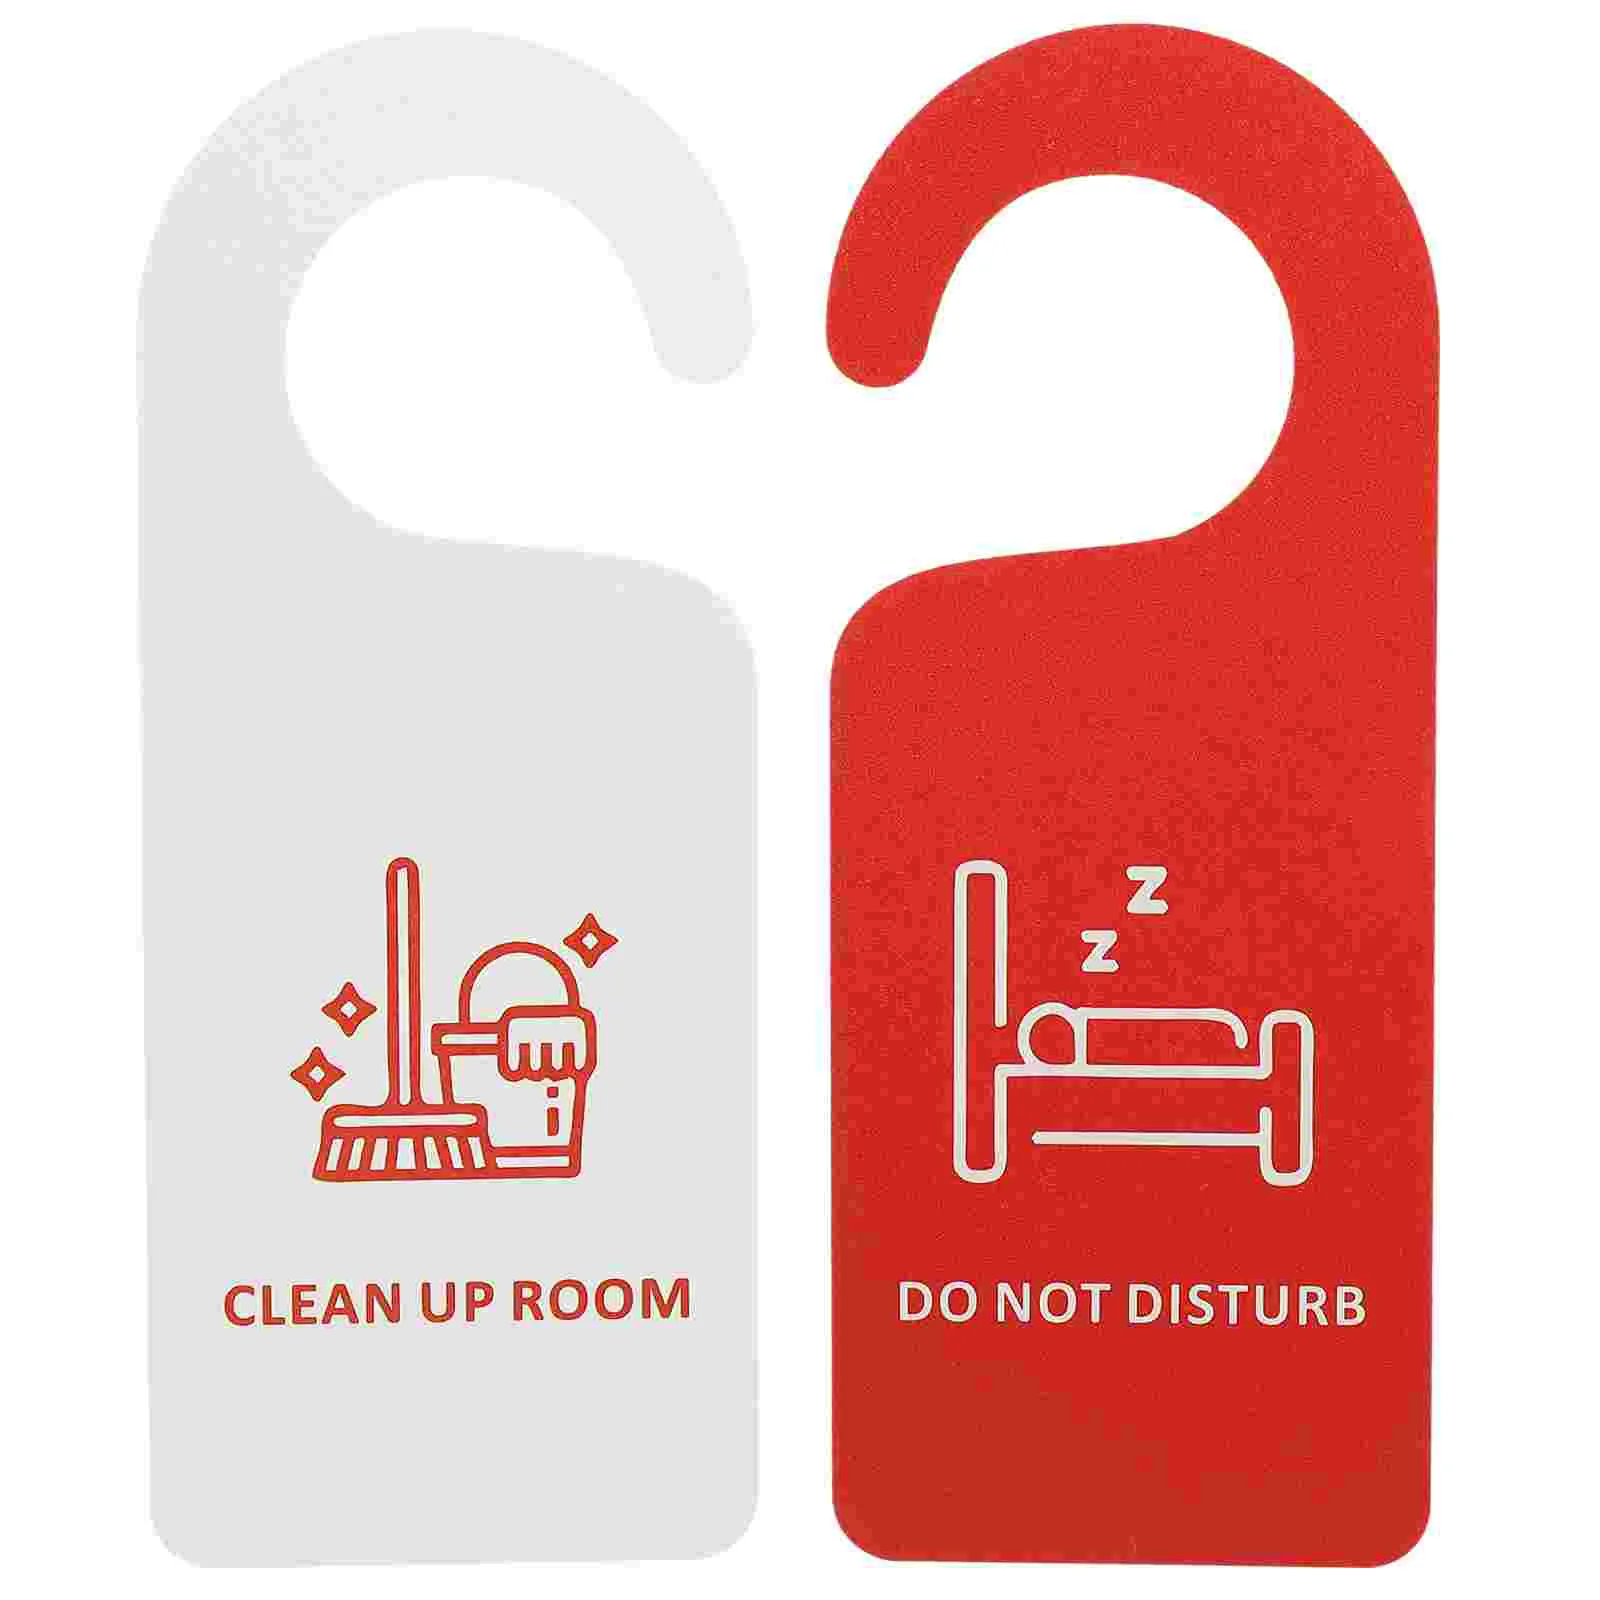 

Do Not Disturb Listing Plastic Clothes Hangers Office Doorknob Signs Accessories Tag Pvc Hotel Hanging Room Tags